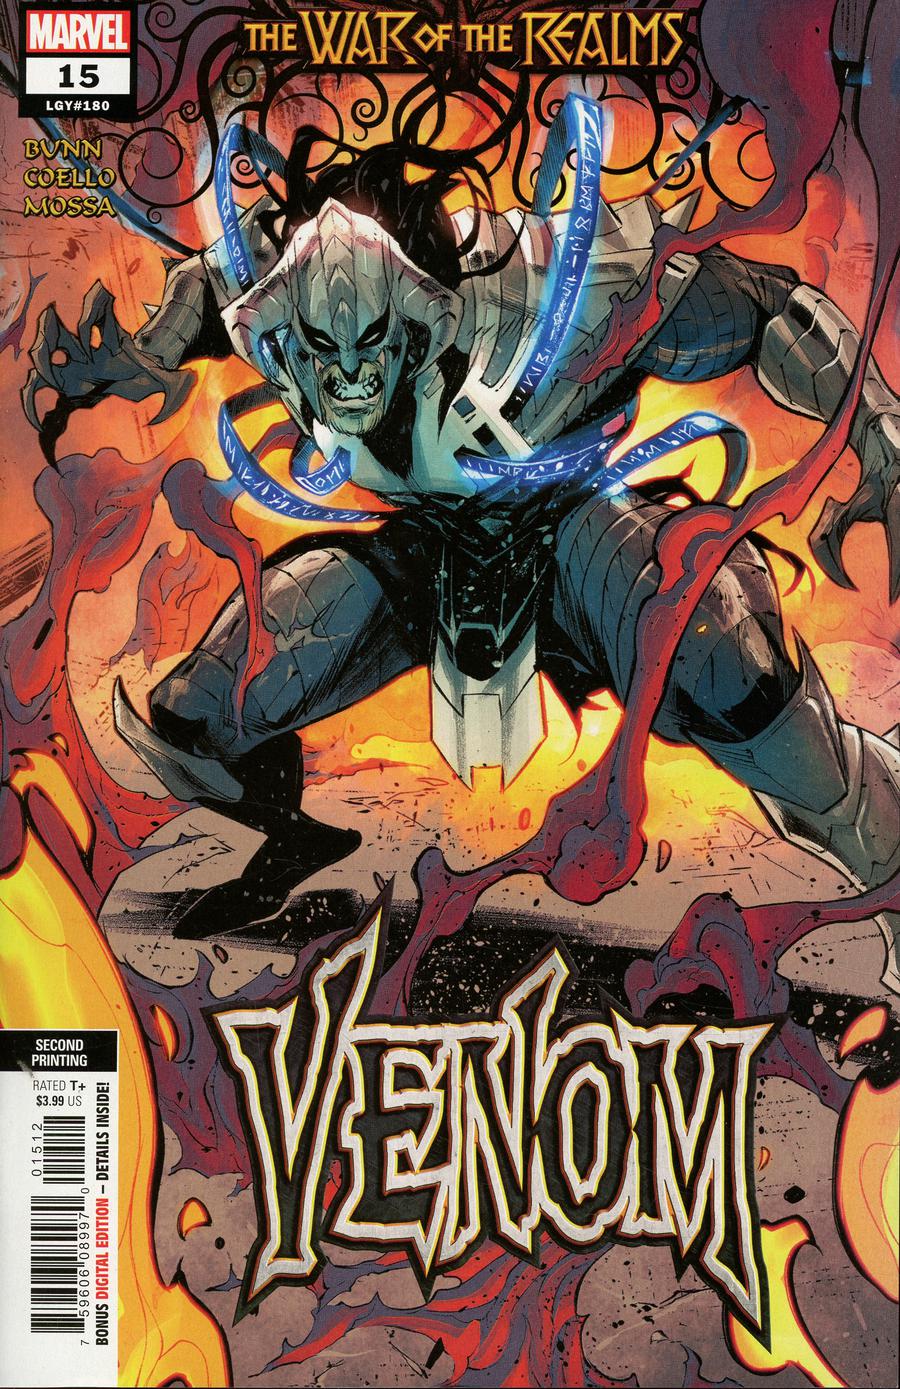 Venom Vol 4 #15 Cover C 2nd Ptg Variant Iban Coello Cover (War Of The Realms Tie-In)